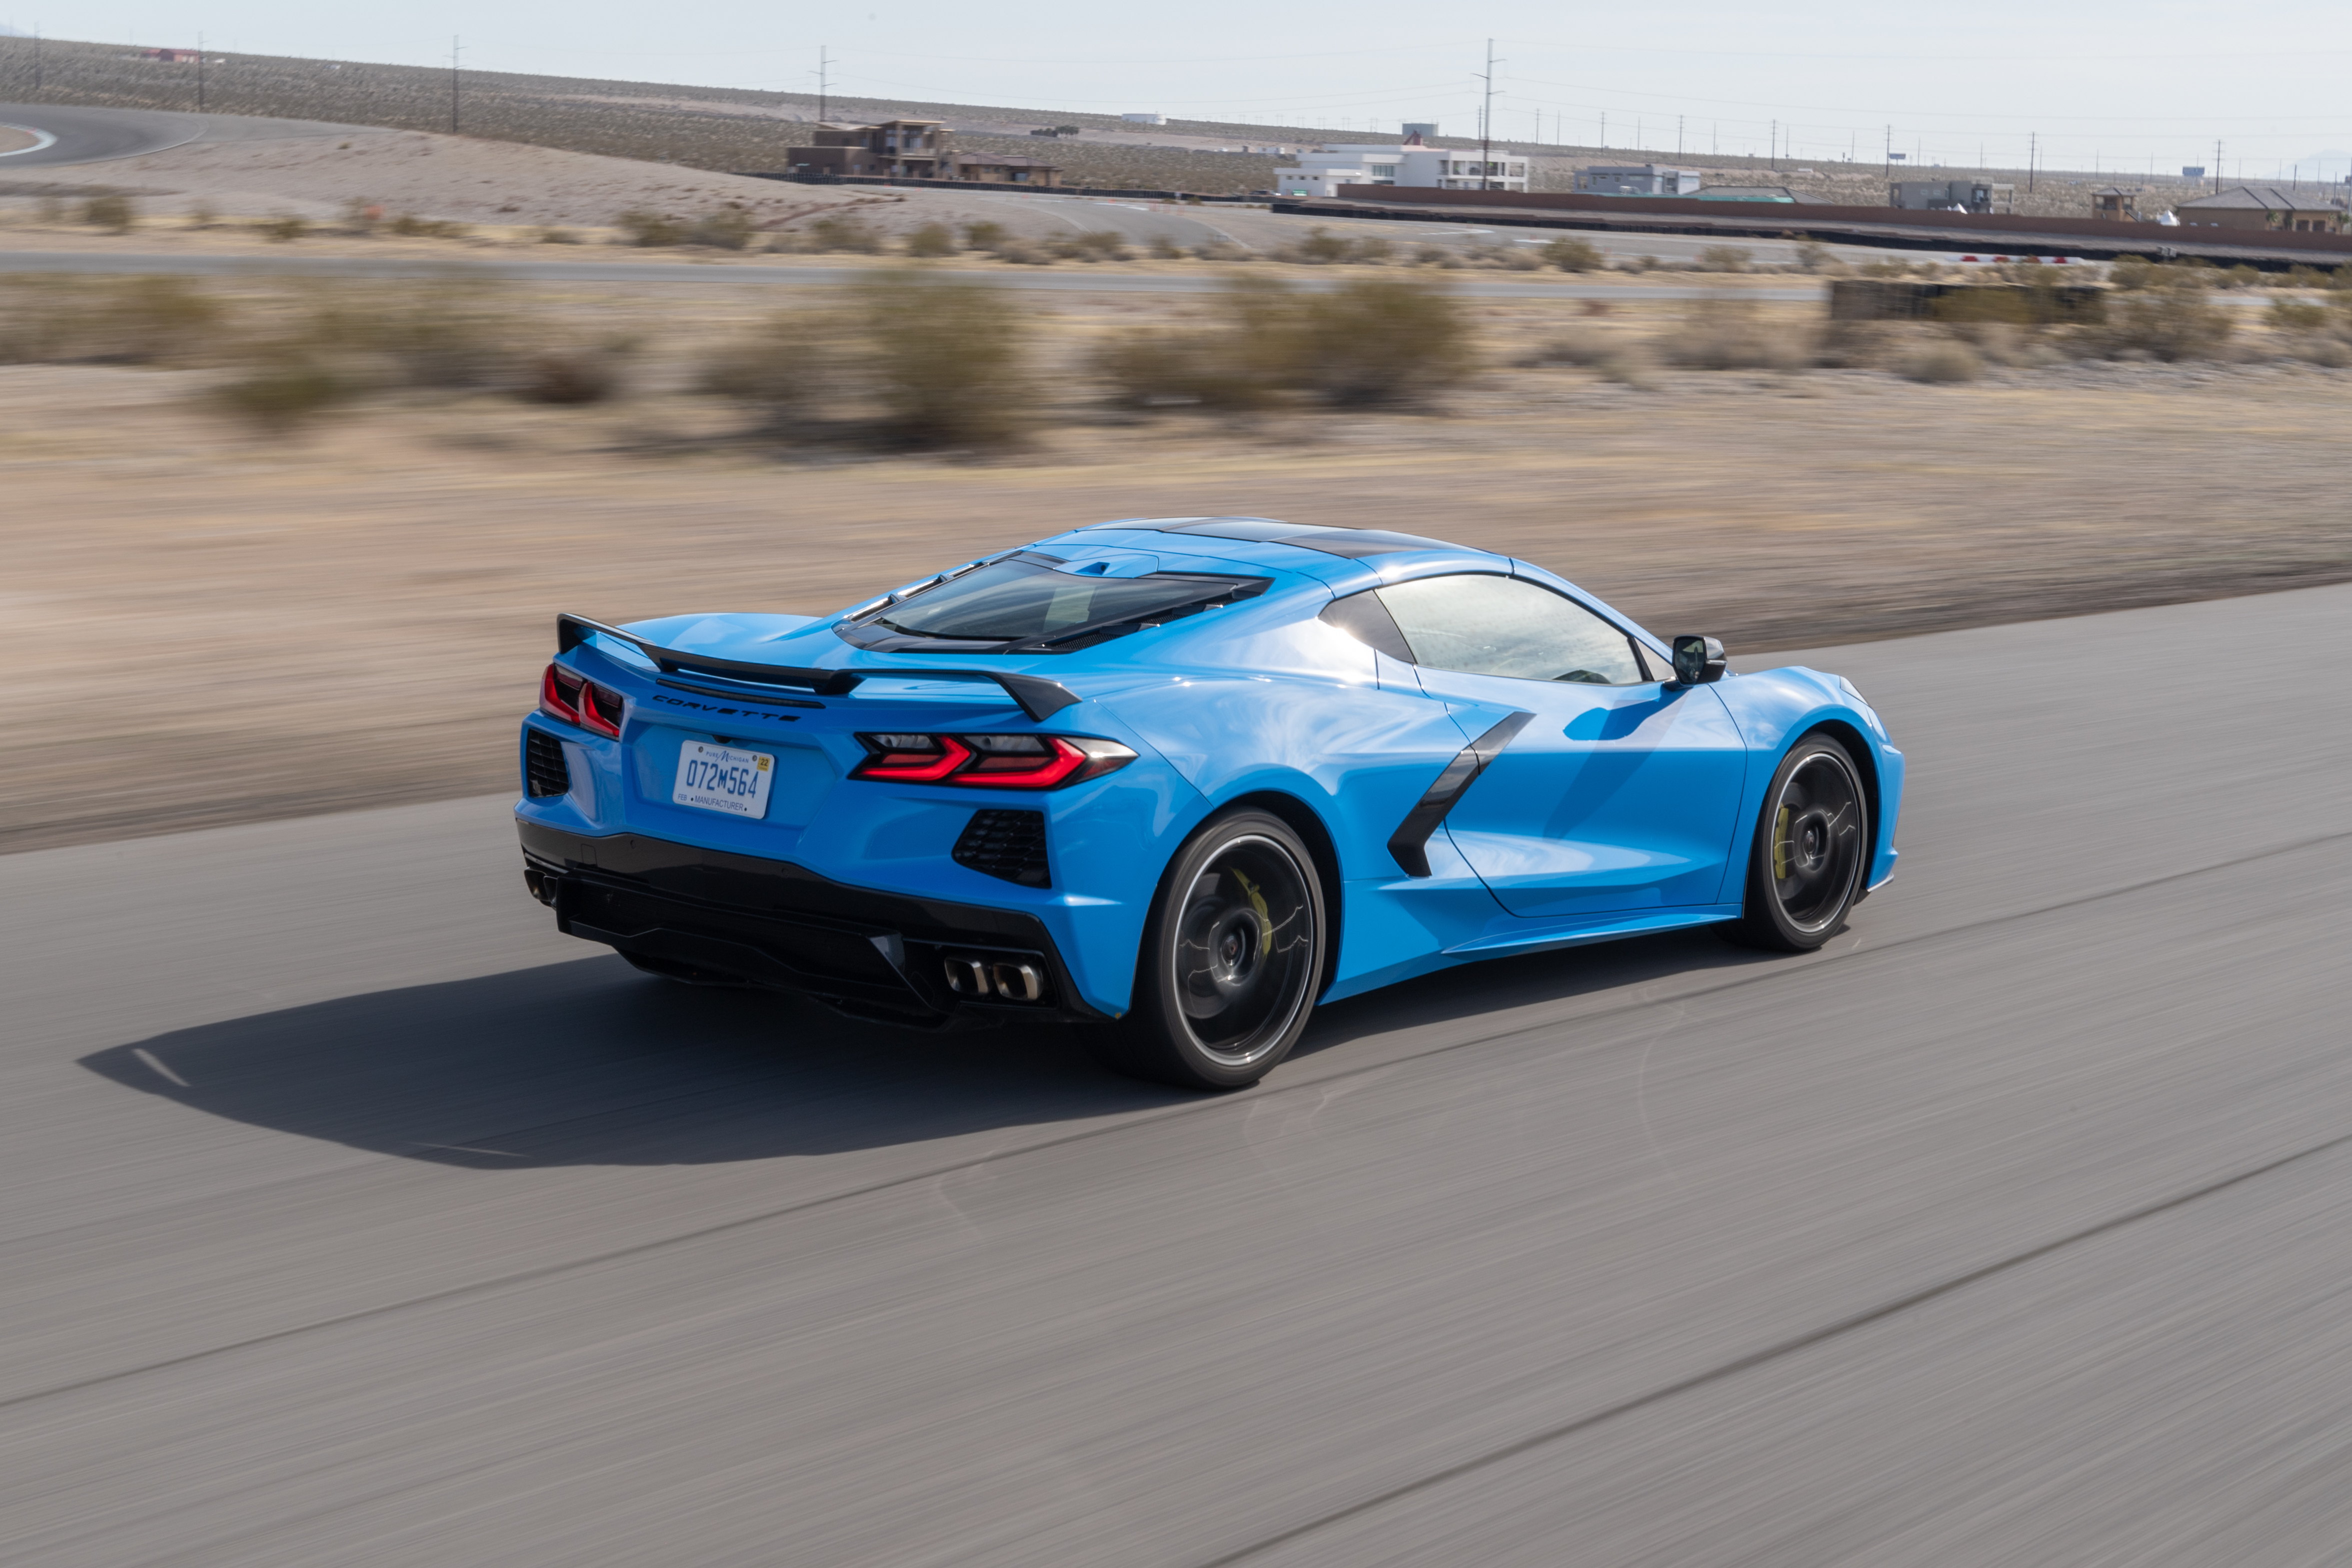 2023 Corvette Pricing Revealed, Stingray 1LT Coupe Is 61,900